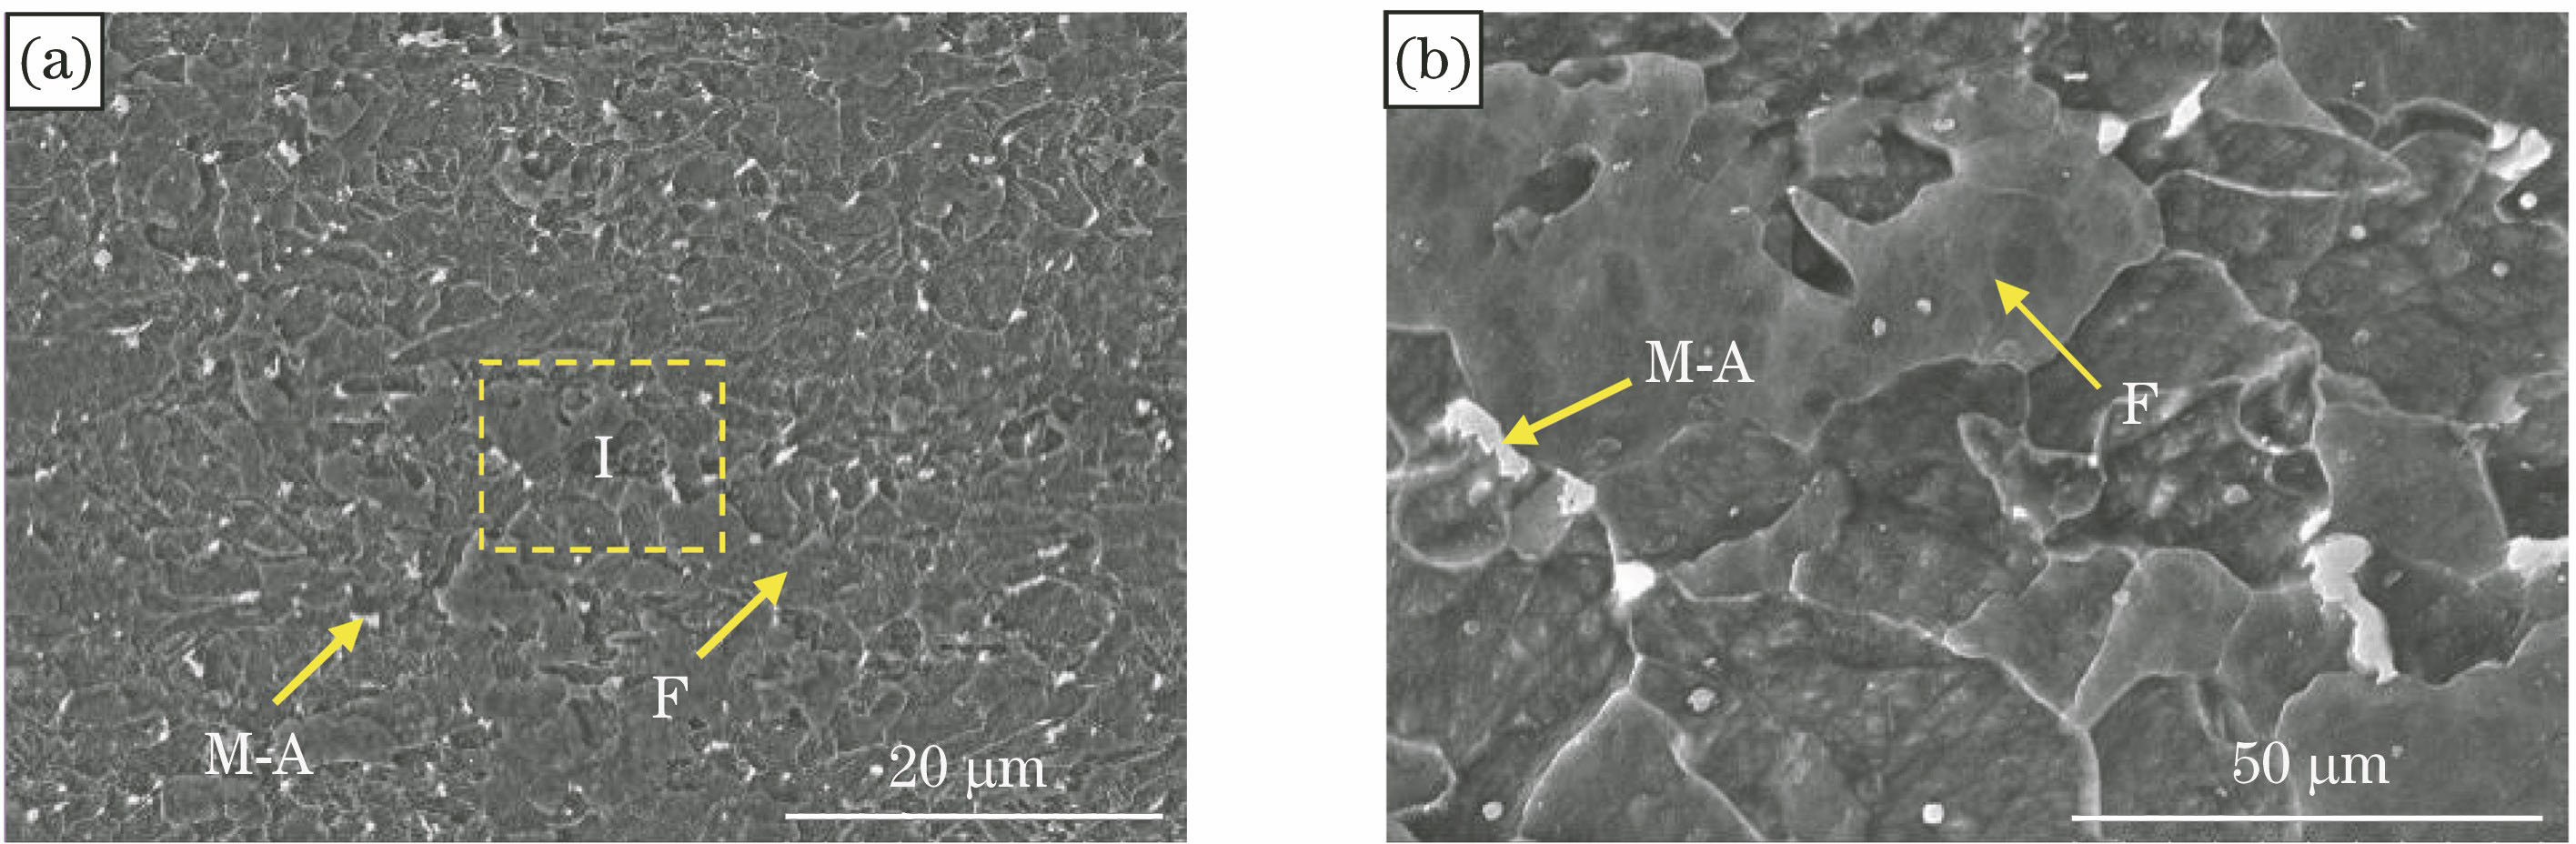 Microstructure of experimental steel. (a) SEM morphology with low magnification; (b) enlarged microstructure of I area